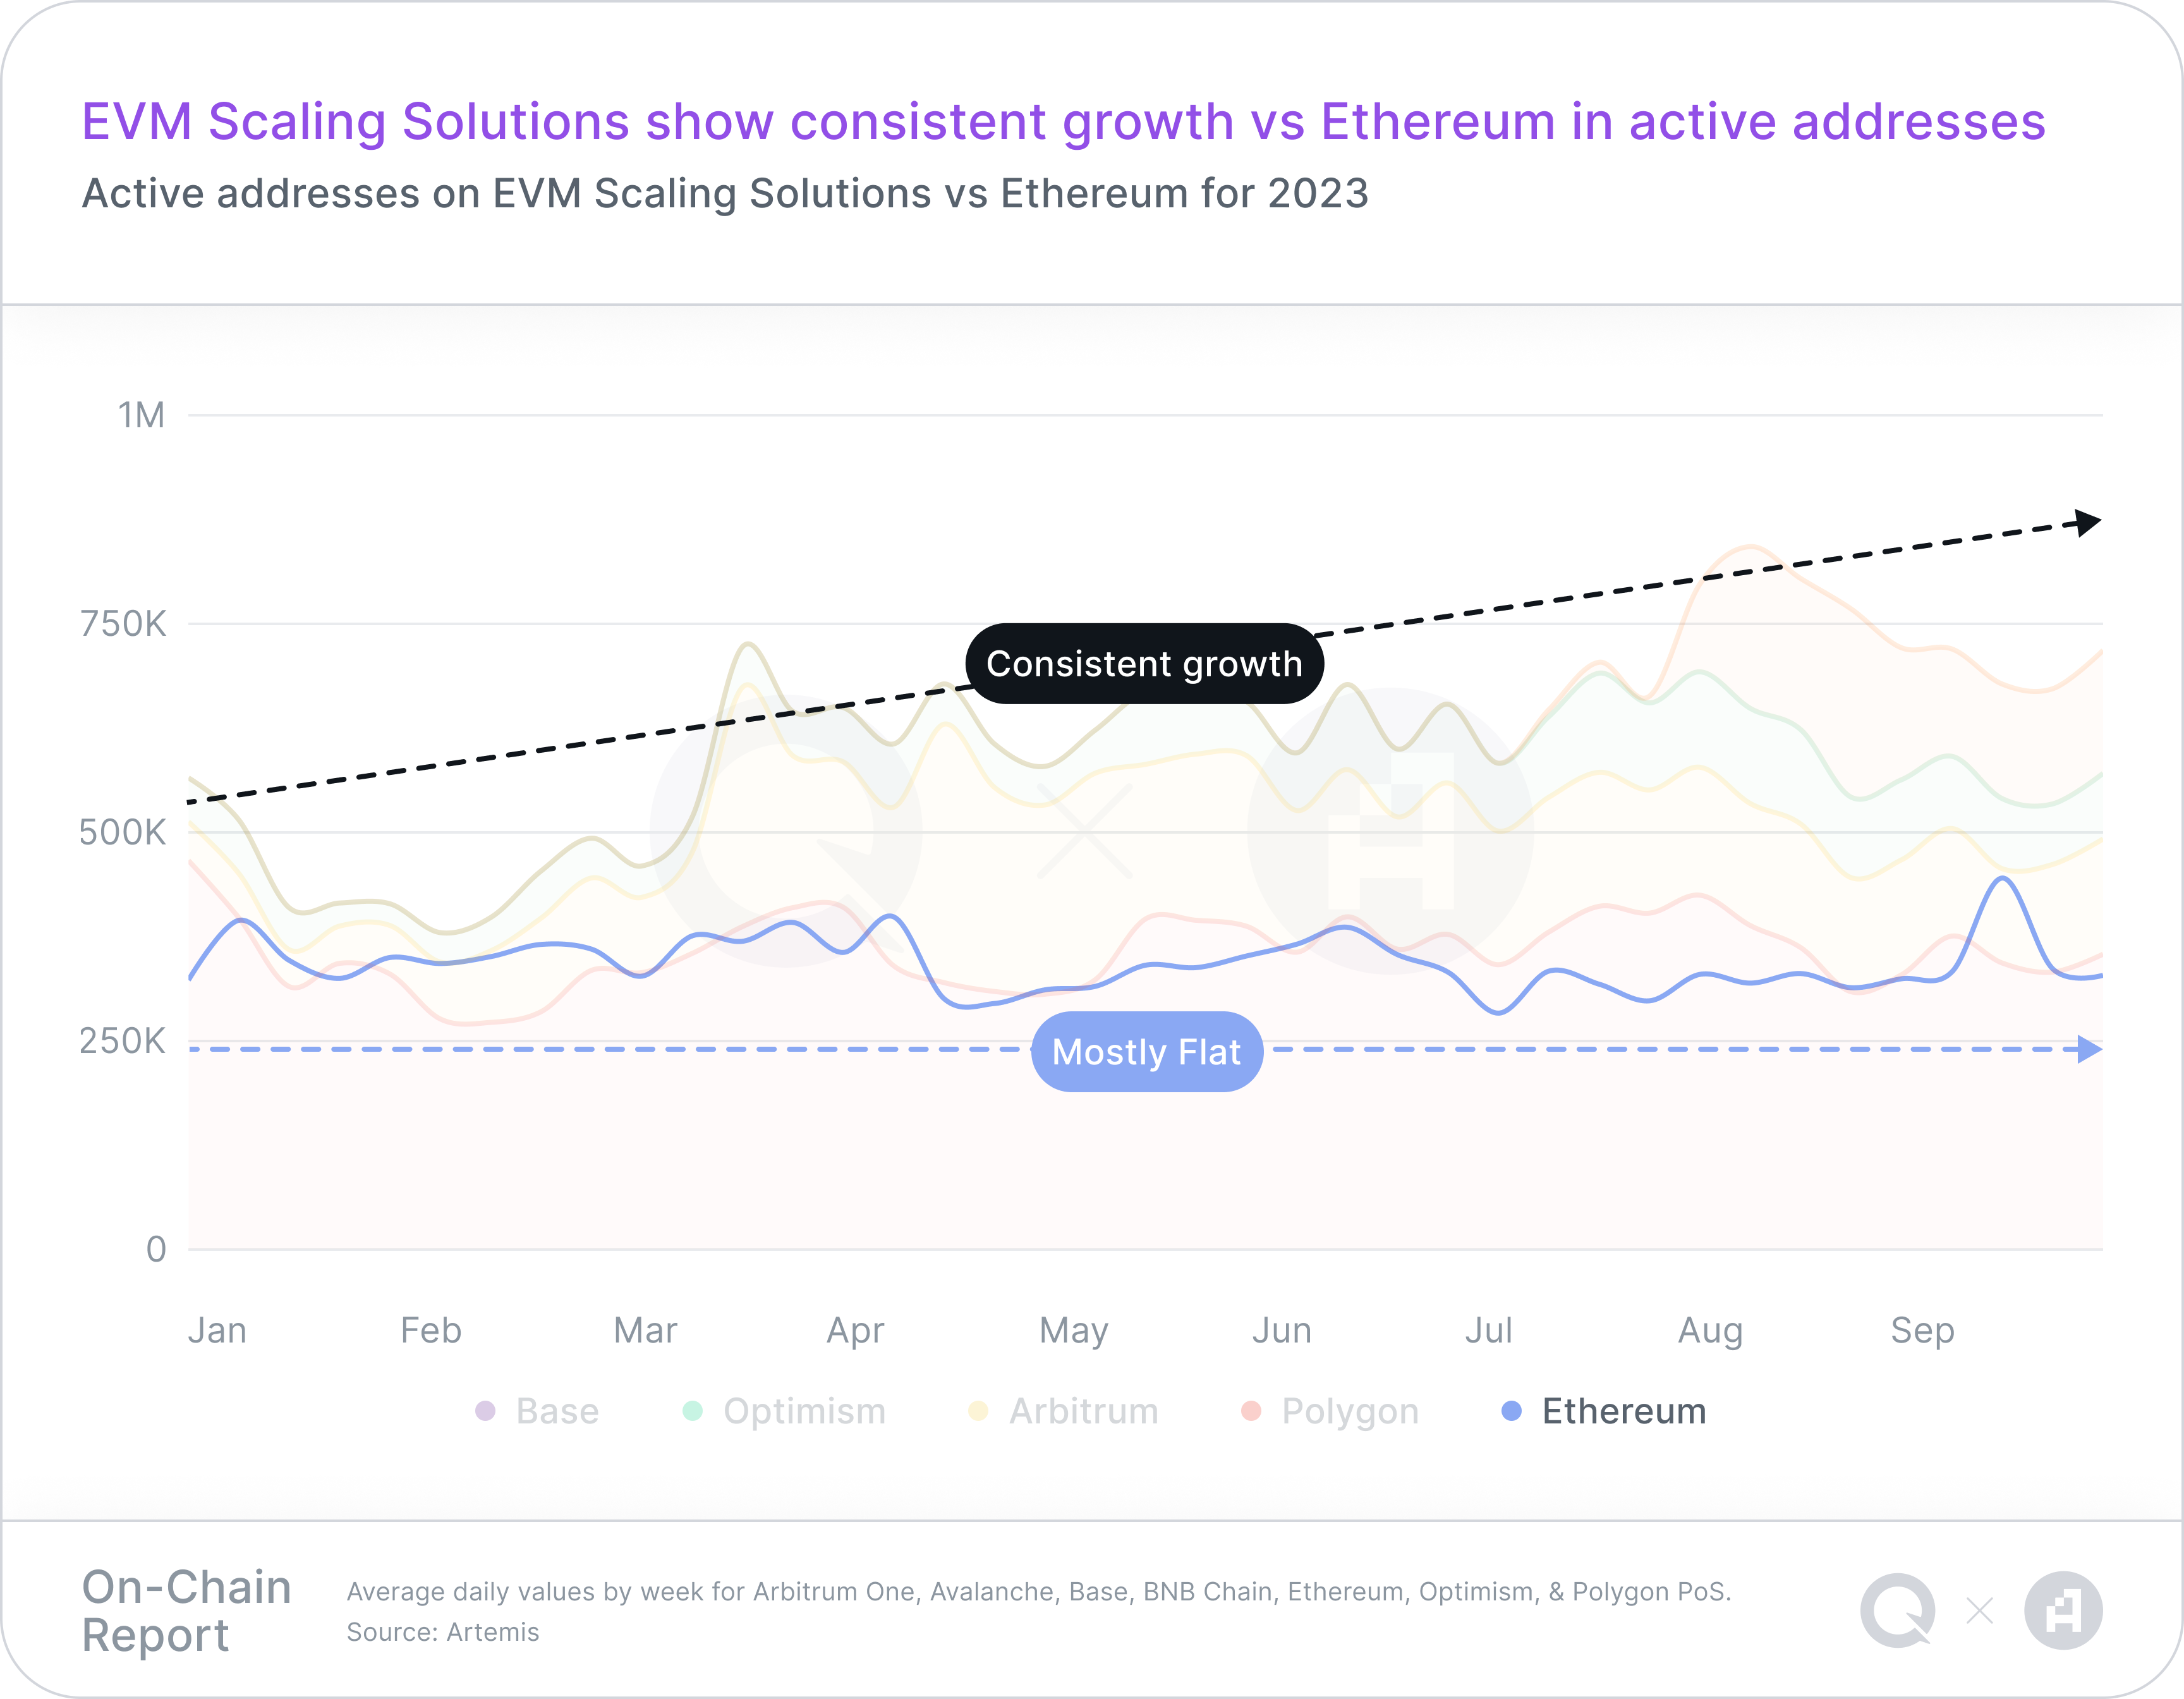 A chart representing Active addresses on EVM Scaling Solutions vs Ethereum for 2023, with a takeaway headline of "EVM Scaling Solutions show consistent growth vs Ethereum in active addresses"